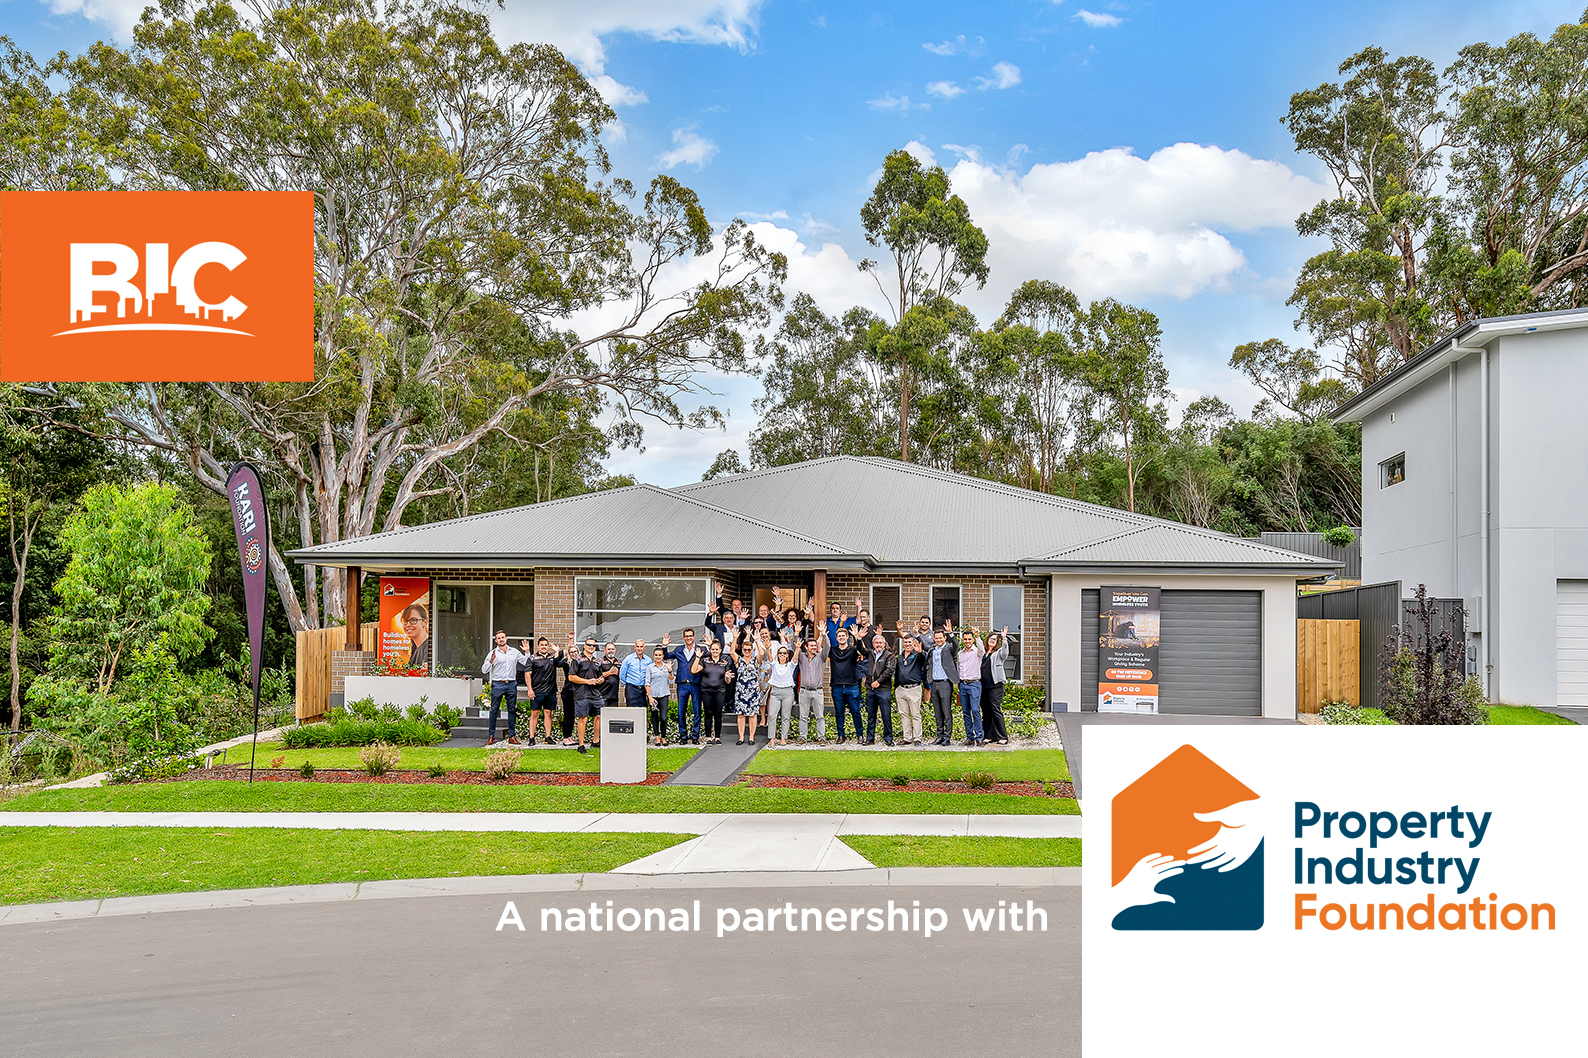 BIC Services joins the Property Industry Foundation as a National Partner